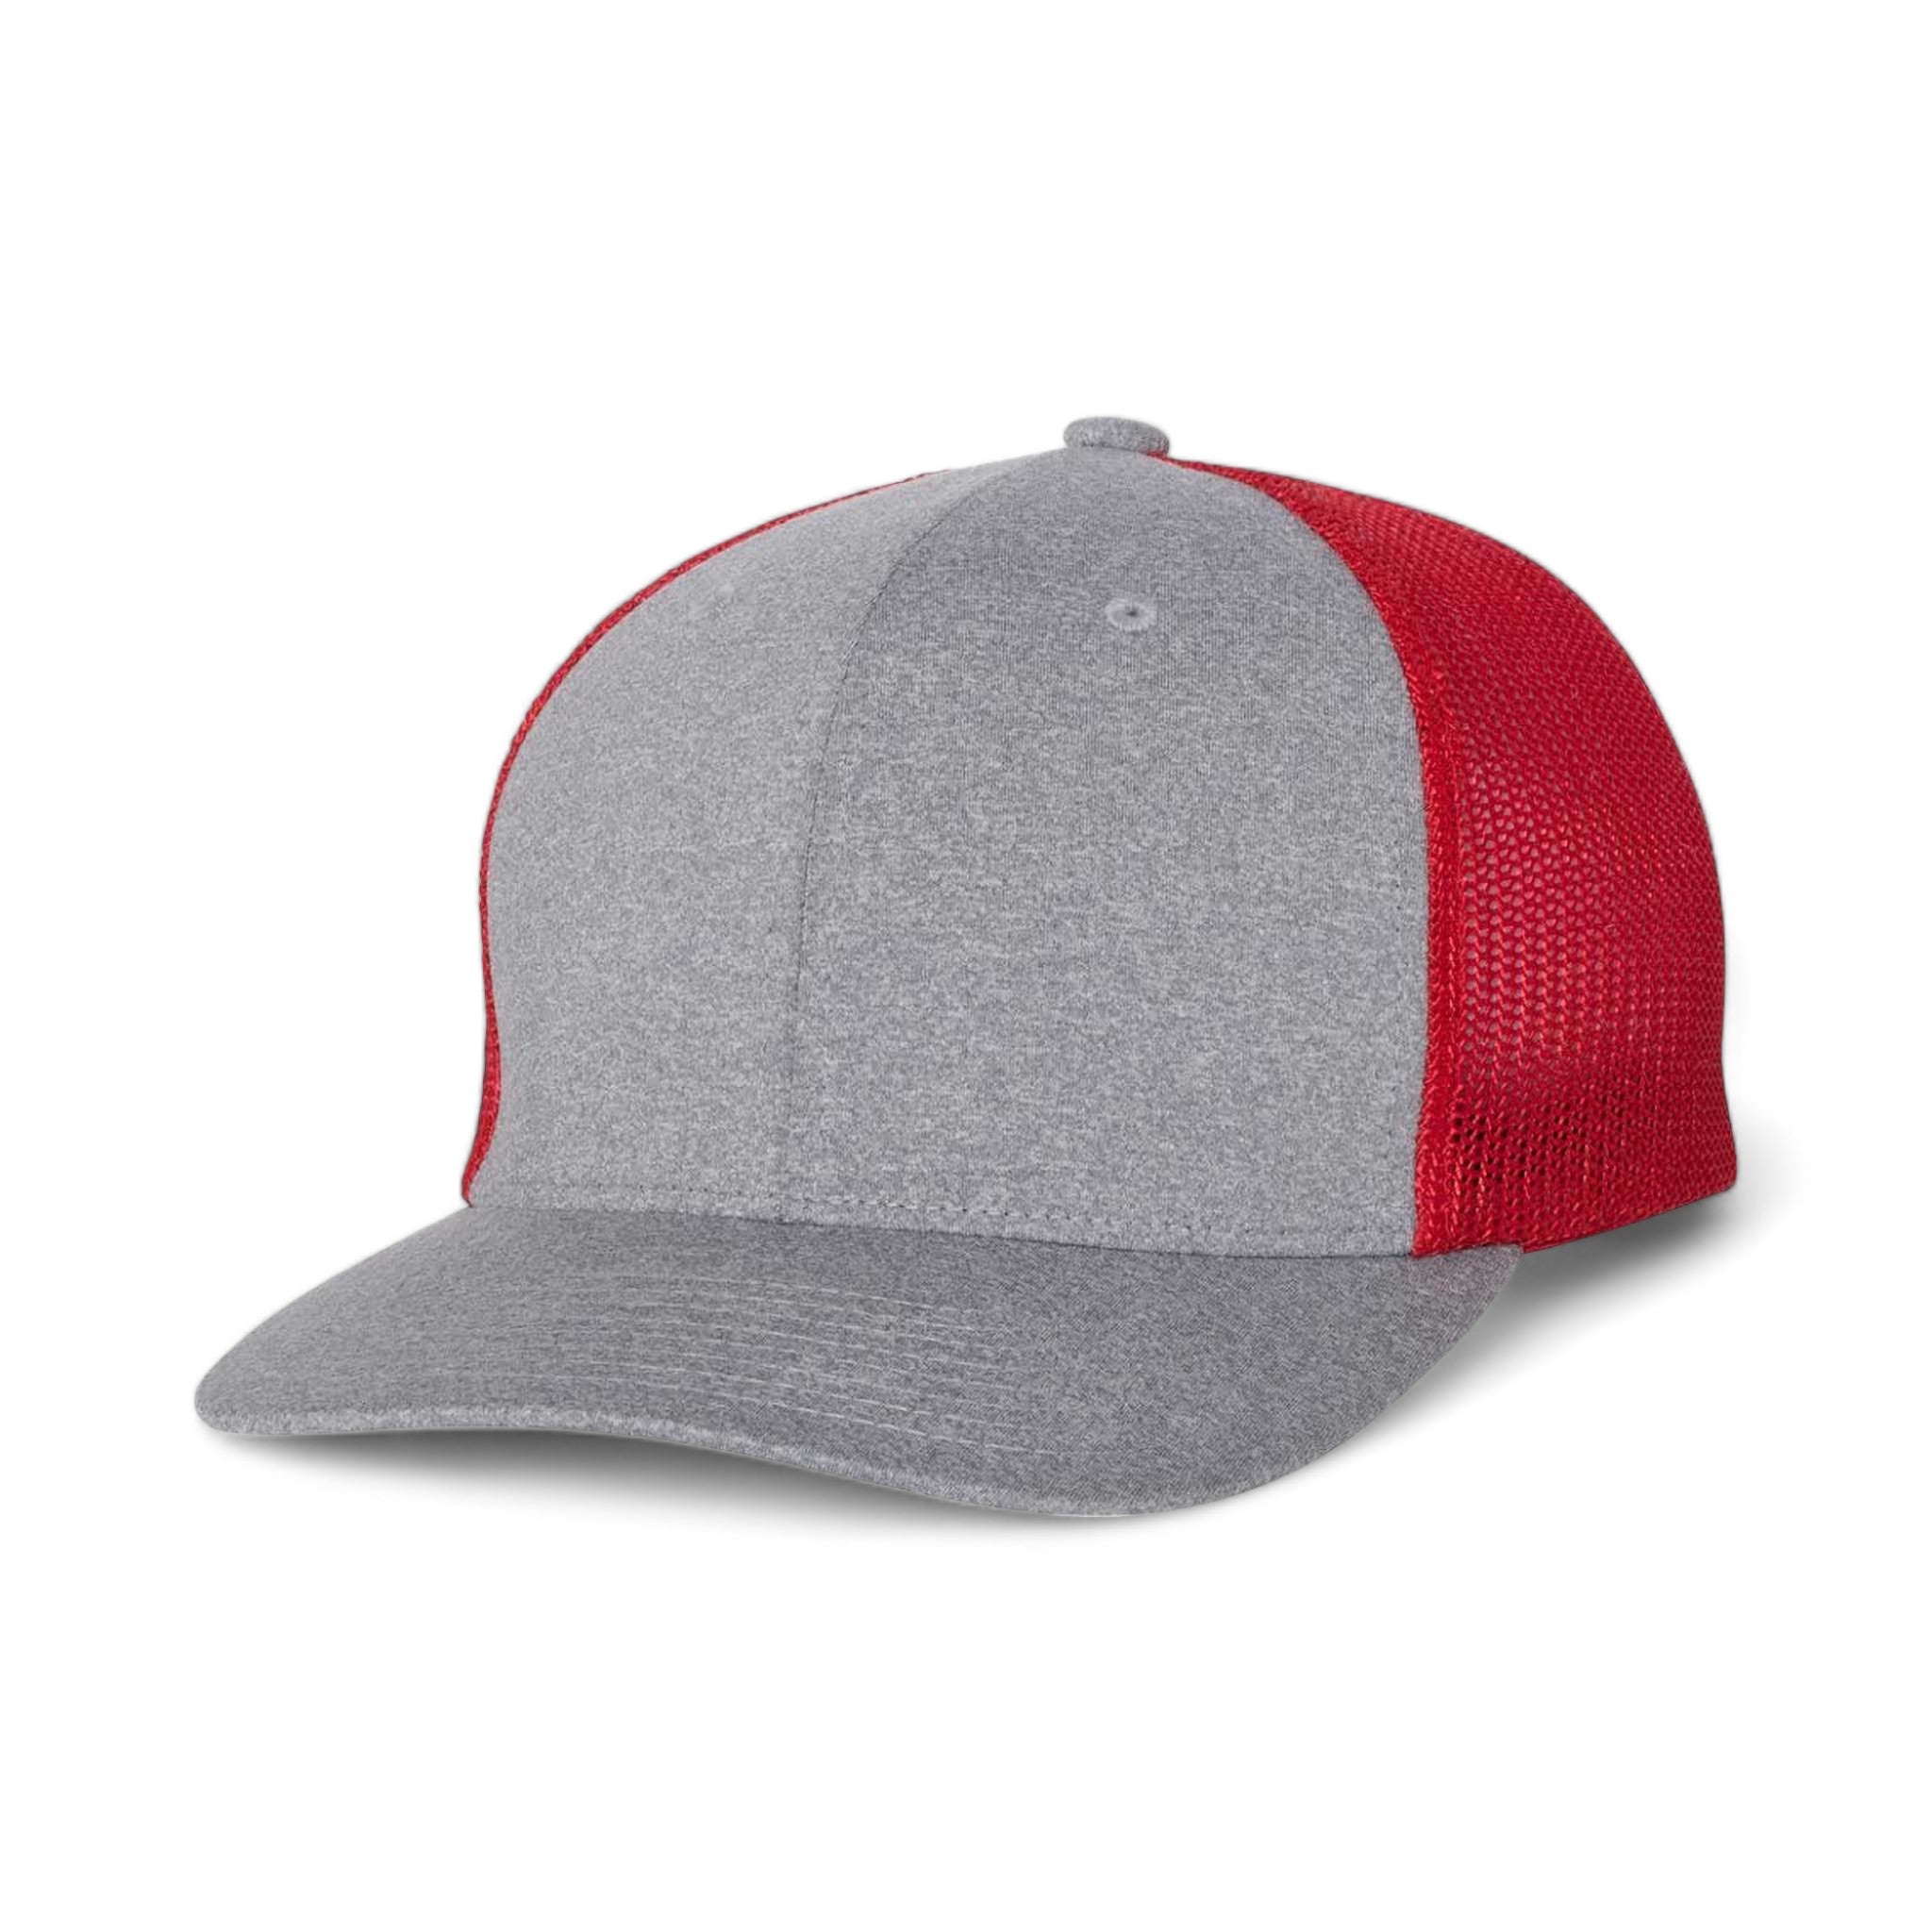 Side view of Flexfit 6311 custom hat in heather grey and red